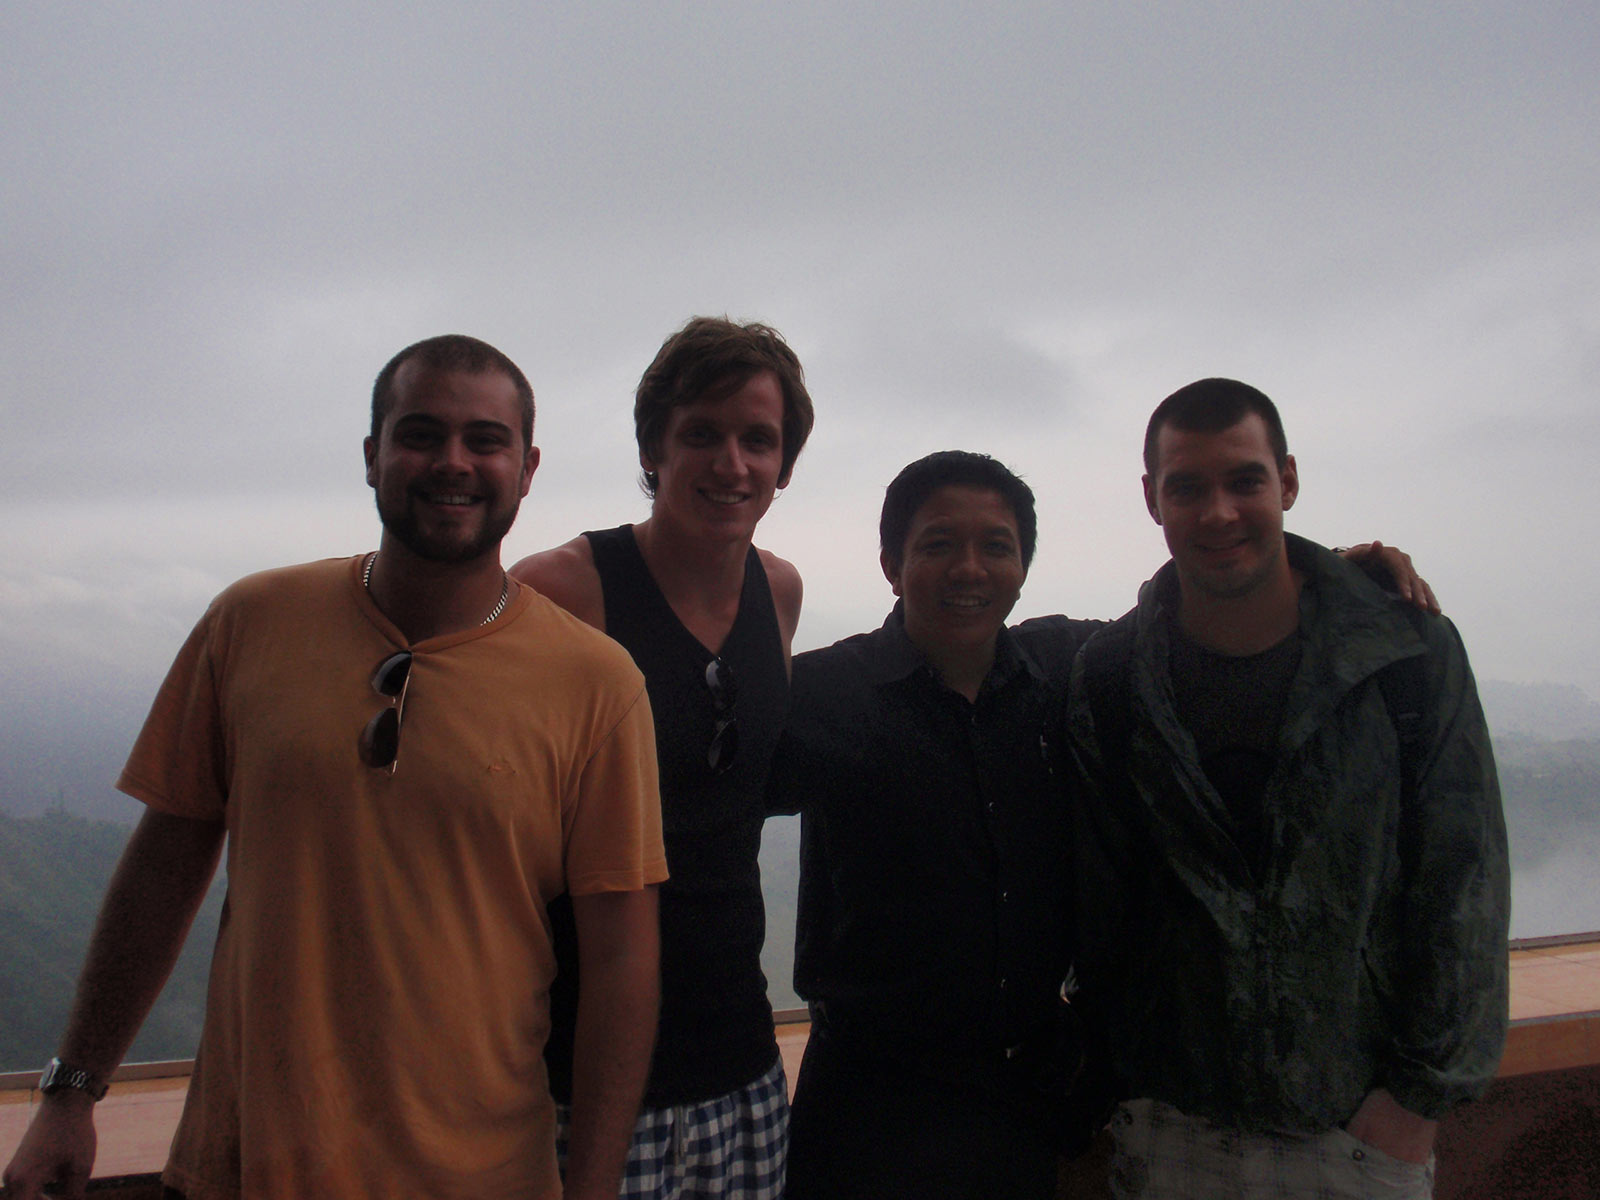 David Simpson with three guys in Bali. My first taste of Asia